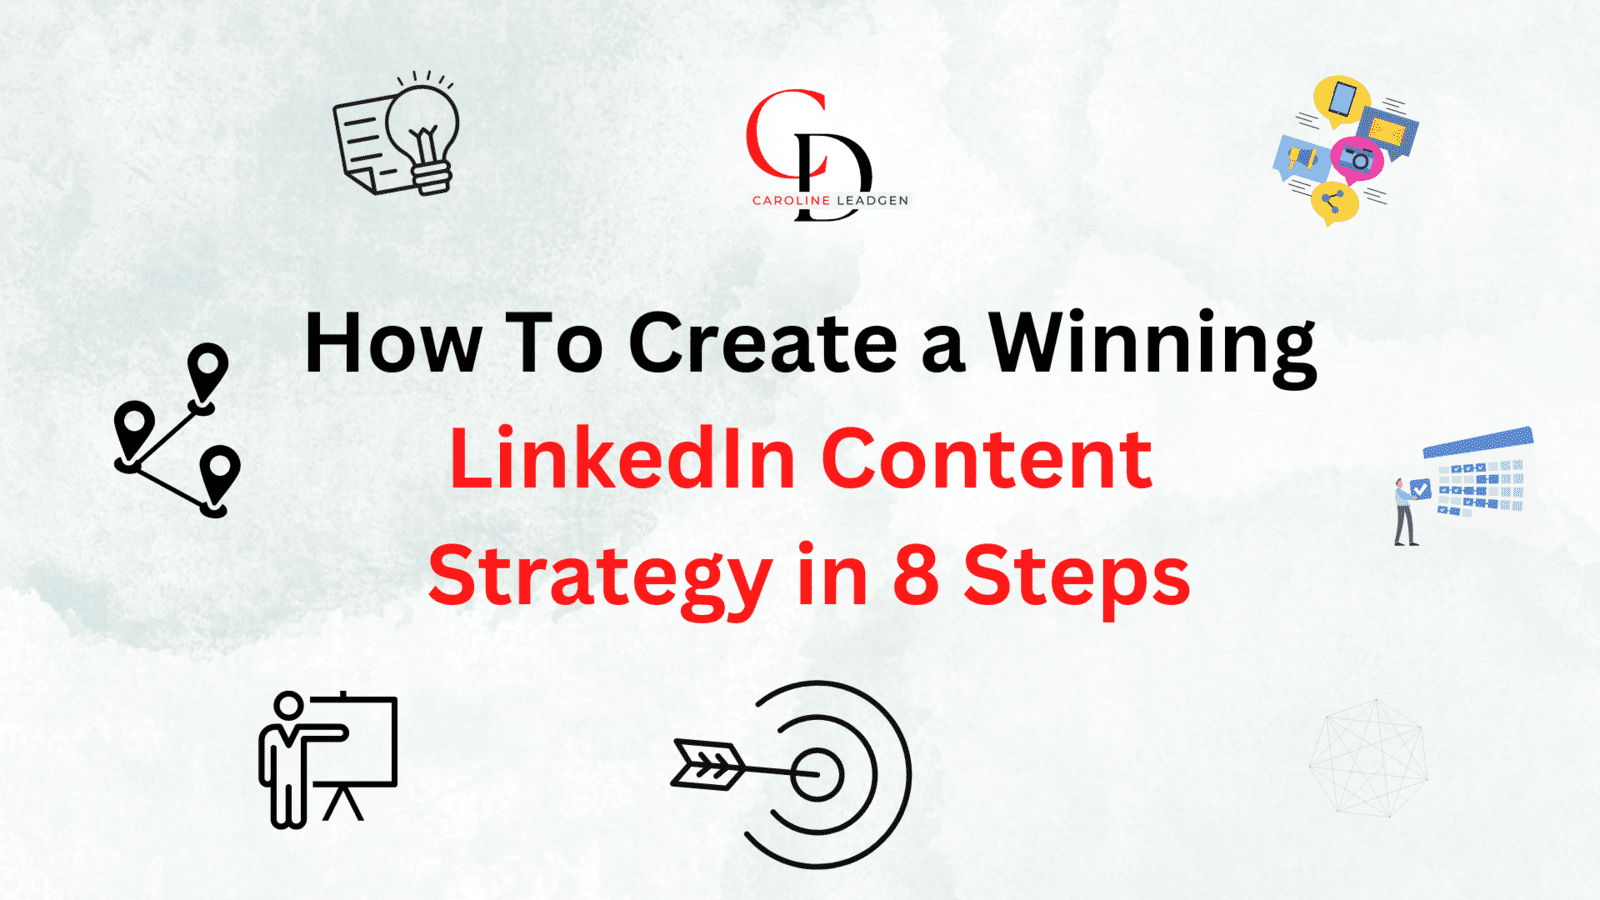 How To Create a WinningLinkedIn Content Strategy in 8 Steps